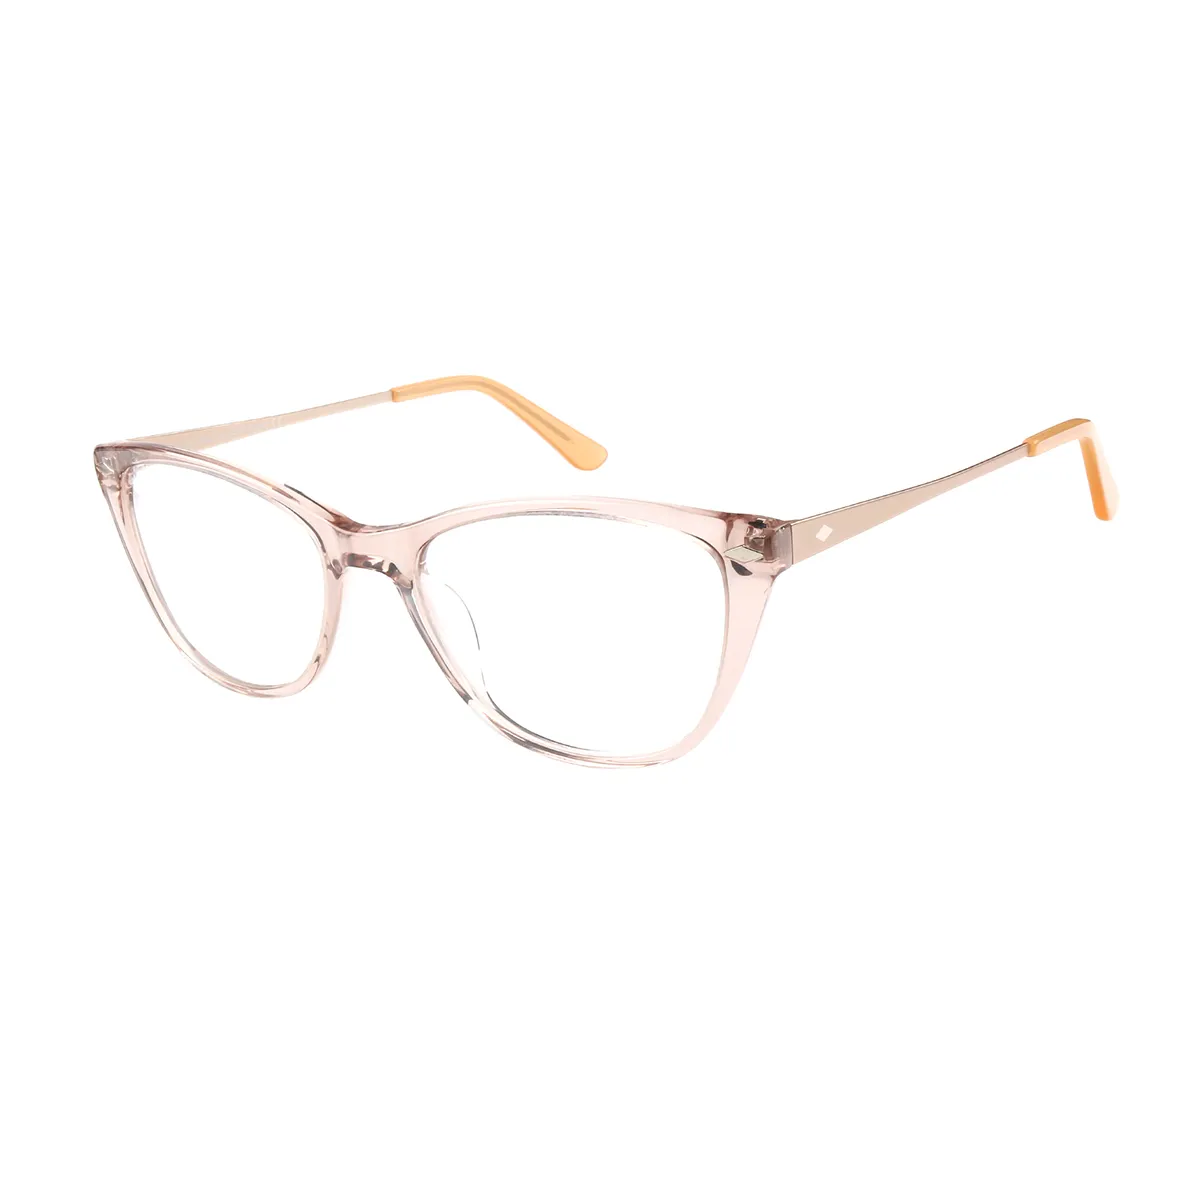 Corrie - Square Brown Glasses for Women - EFE